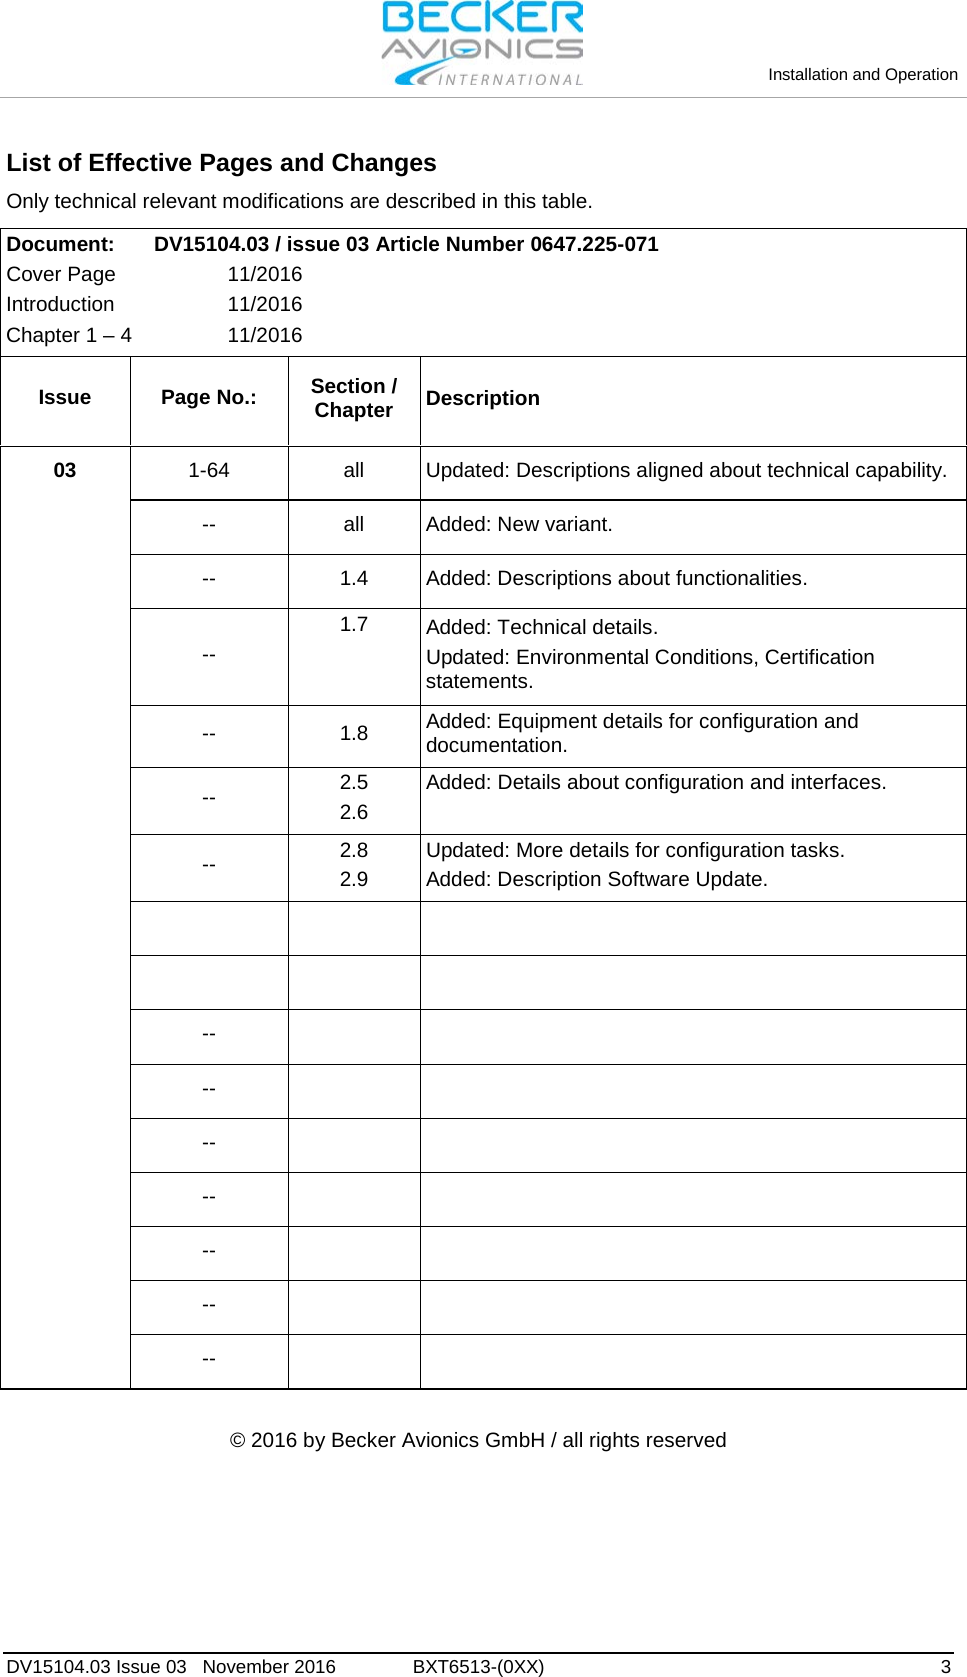   Installation and Operation   DV15104.03 Issue 03   November 2016 BXT6513-(0XX)  3 List of Effective Pages and Changes Only technical relevant modifications are described in this table.  Document:  DV15104.03 / issue 03 Article Number 0647.225-071 Cover Page    11/2016 Introduction    11/2016 Chapter 1 – 4    11/2016 Issue Page No.: Section / Chapter Description 03  1-64 all Updated: Descriptions aligned about technical capability.  -- all Added: New variant.  -- 1.4 Added: Descriptions about functionalities.  -- 1.7   Added: Technical details. Updated: Environmental Conditions, Certification statements.  -- 1.8 Added: Equipment details for configuration and documentation.  -- 2.5 2.6 Added: Details about configuration and interfaces.   -- 2.8 2.9 Updated: More details for configuration tasks. Added: Description Software Update.              --      --      --      --      --      --      --       © 2016 by Becker Avionics GmbH / all rights reserved 